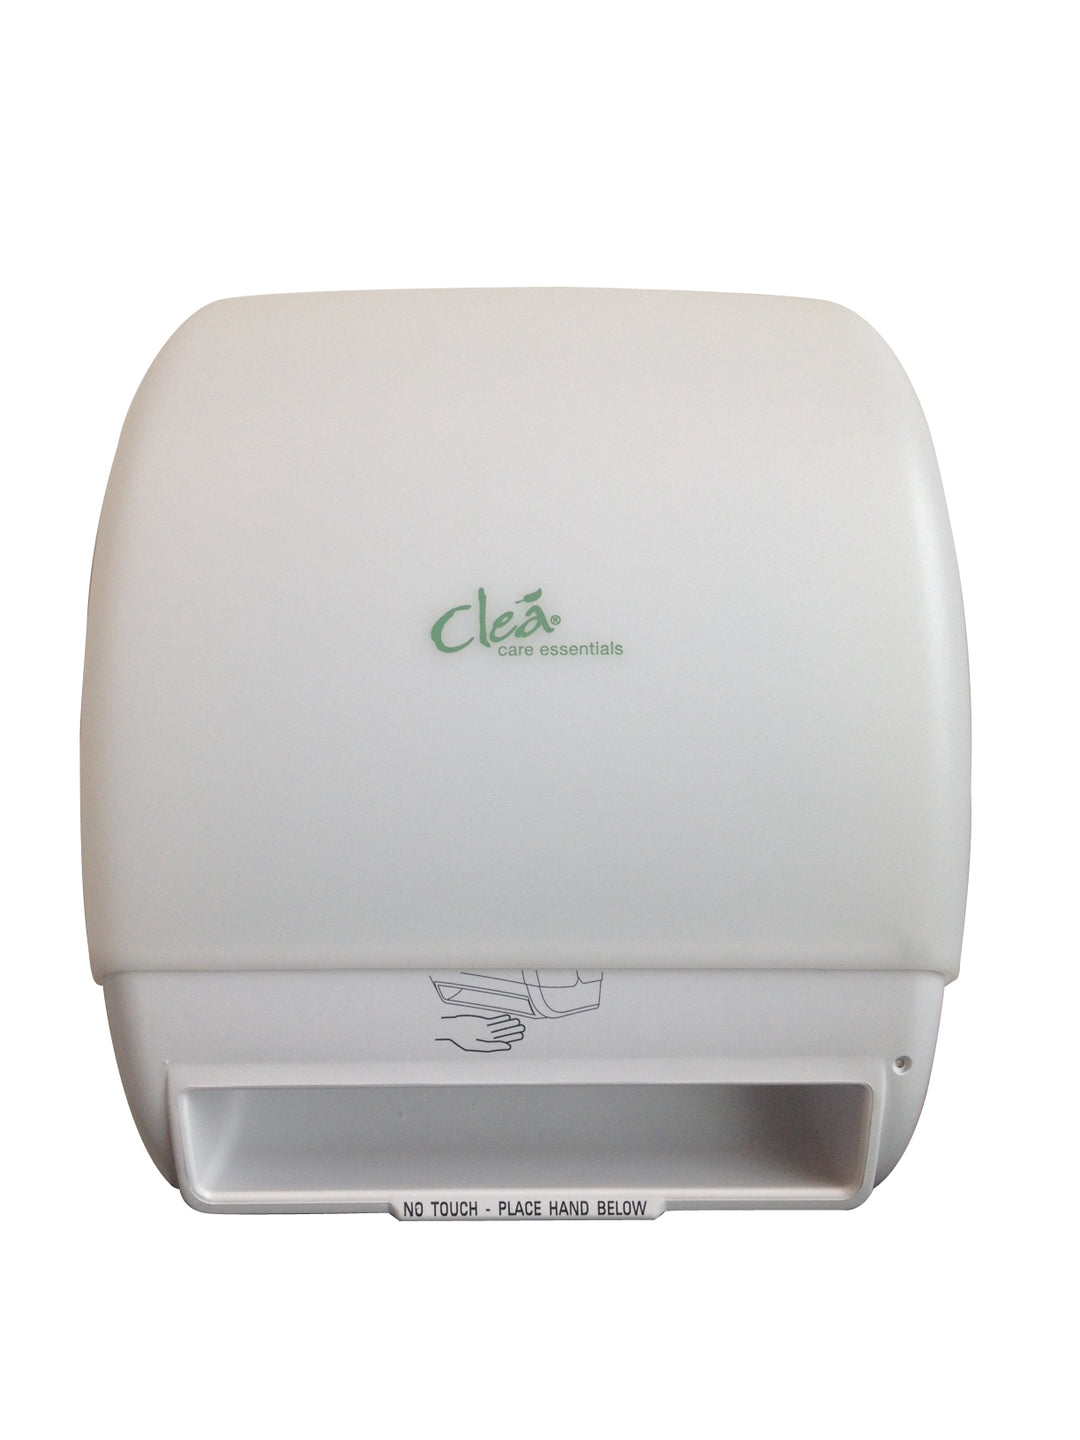 Clea Electronic Hand Towel Dispenser in white, a stylish and hygienic addition to any restroom.